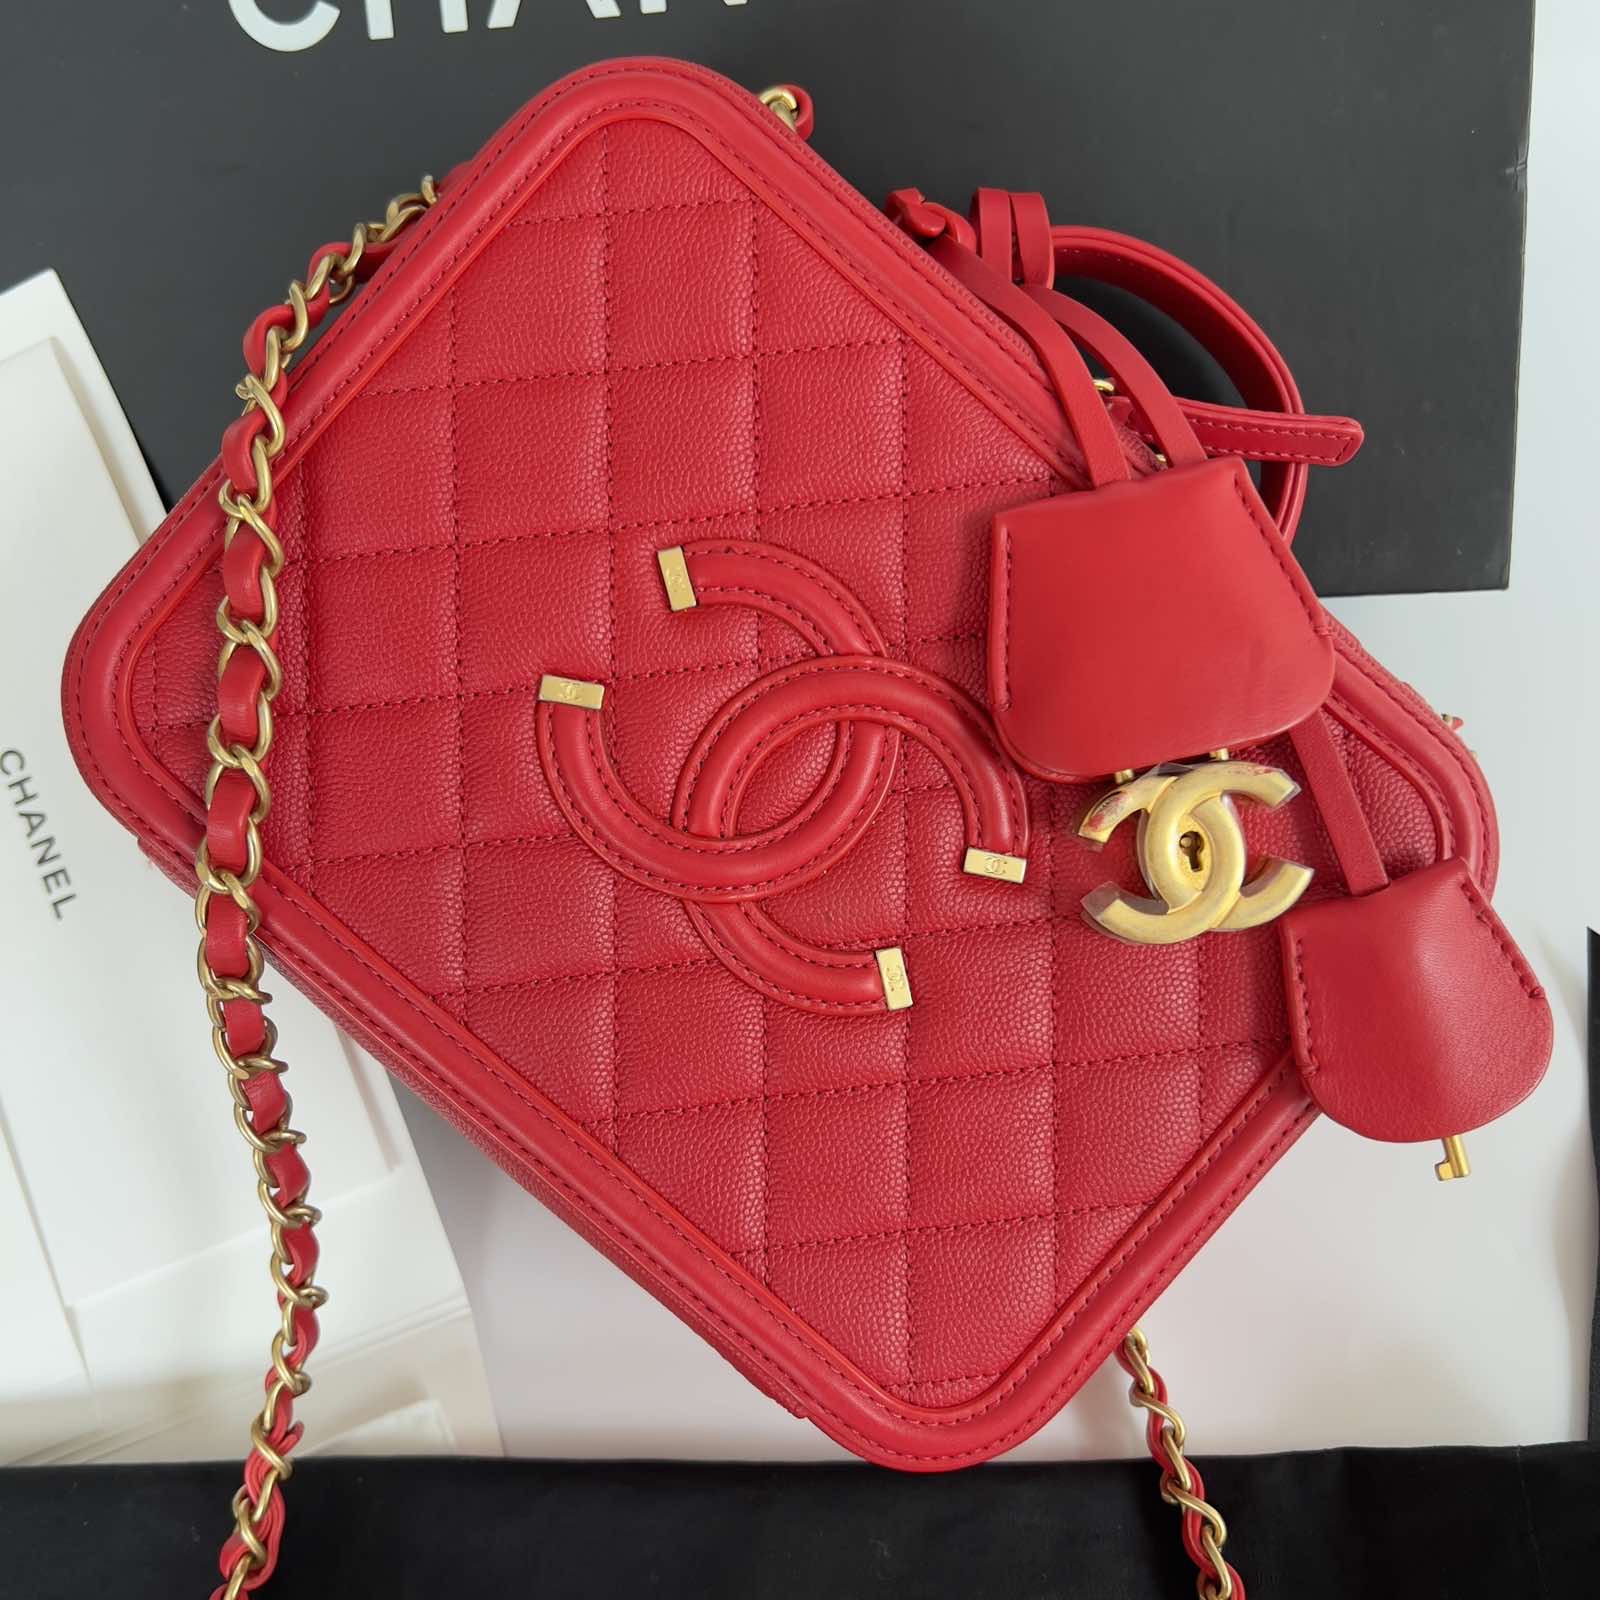 Chanel Filigree Vanity Red Medium Caviar Gold Hardware. Small. Series  25xxxxxx. With booklet, authenticity card, dustbag, box & certificate of